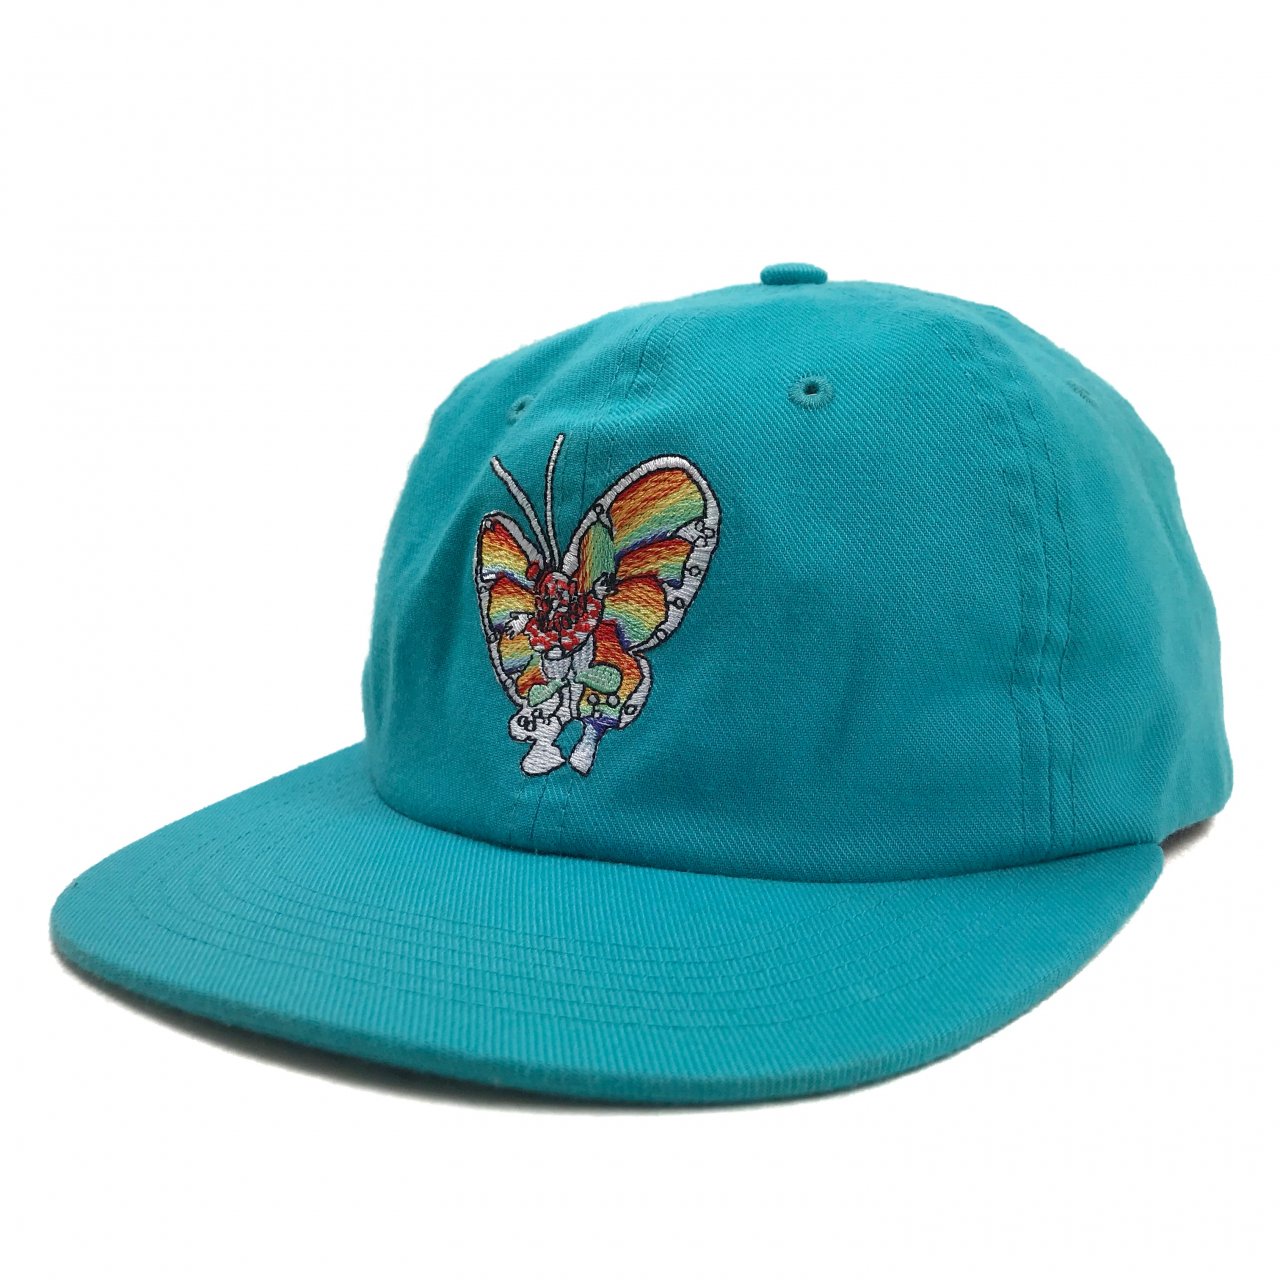 16SS SUPREME Gonz Butterfly 6-Panel Cap (Teal) シュプリーム マーク 